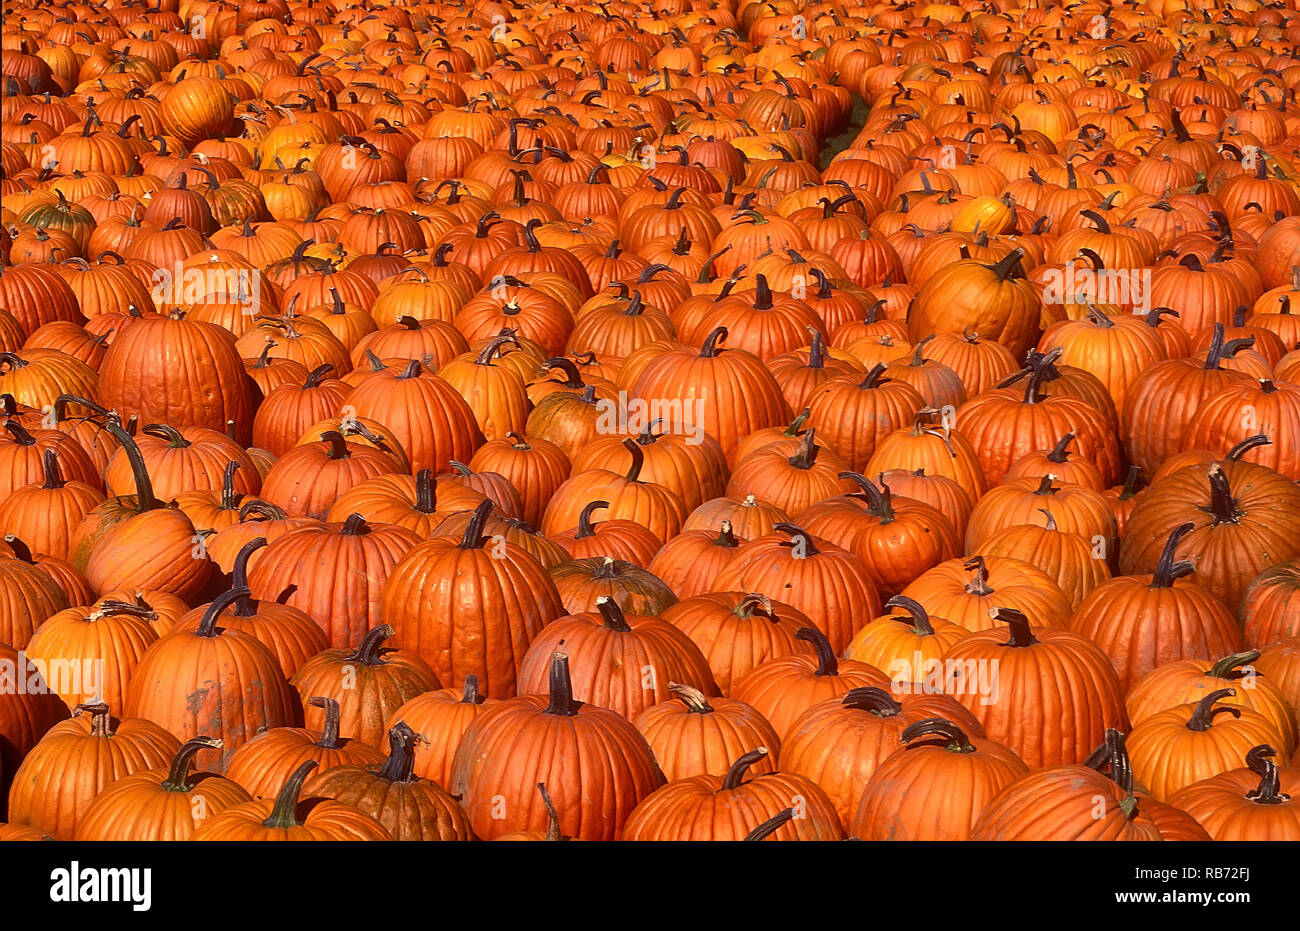 Pumpkins spread on the ground fr sale Stock Photo